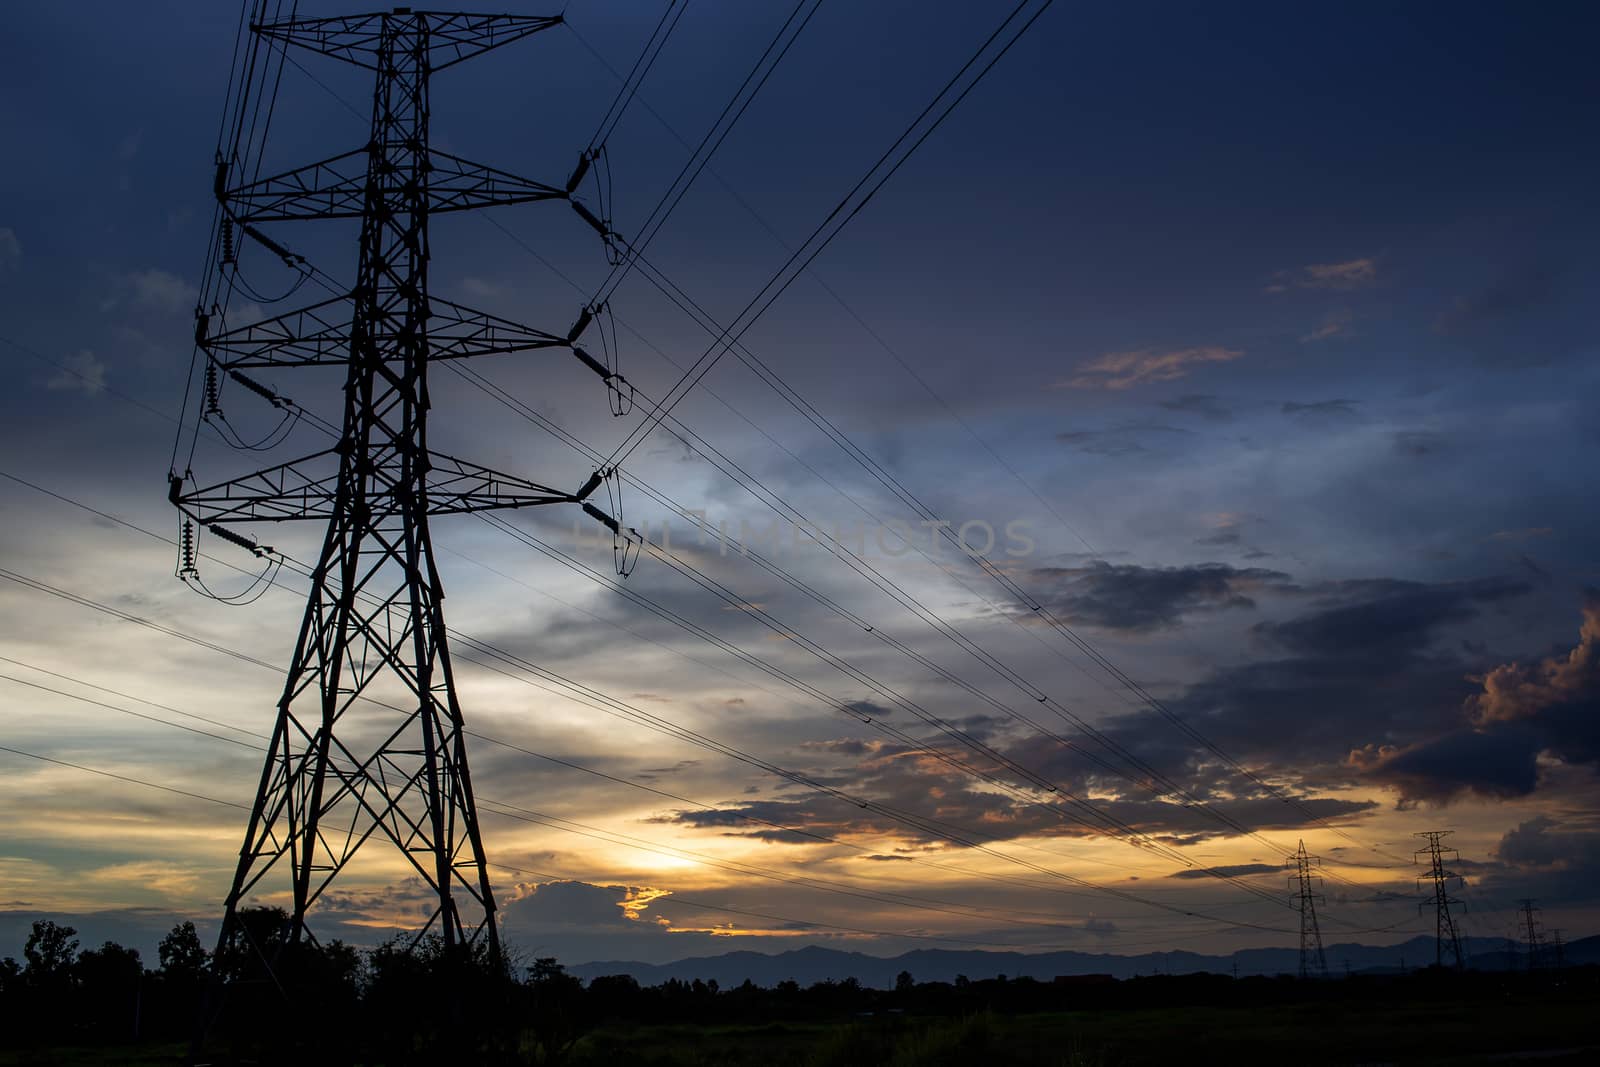 Colorful dramatic sky with Silhouette of high voltage pole and s by kaiskynet